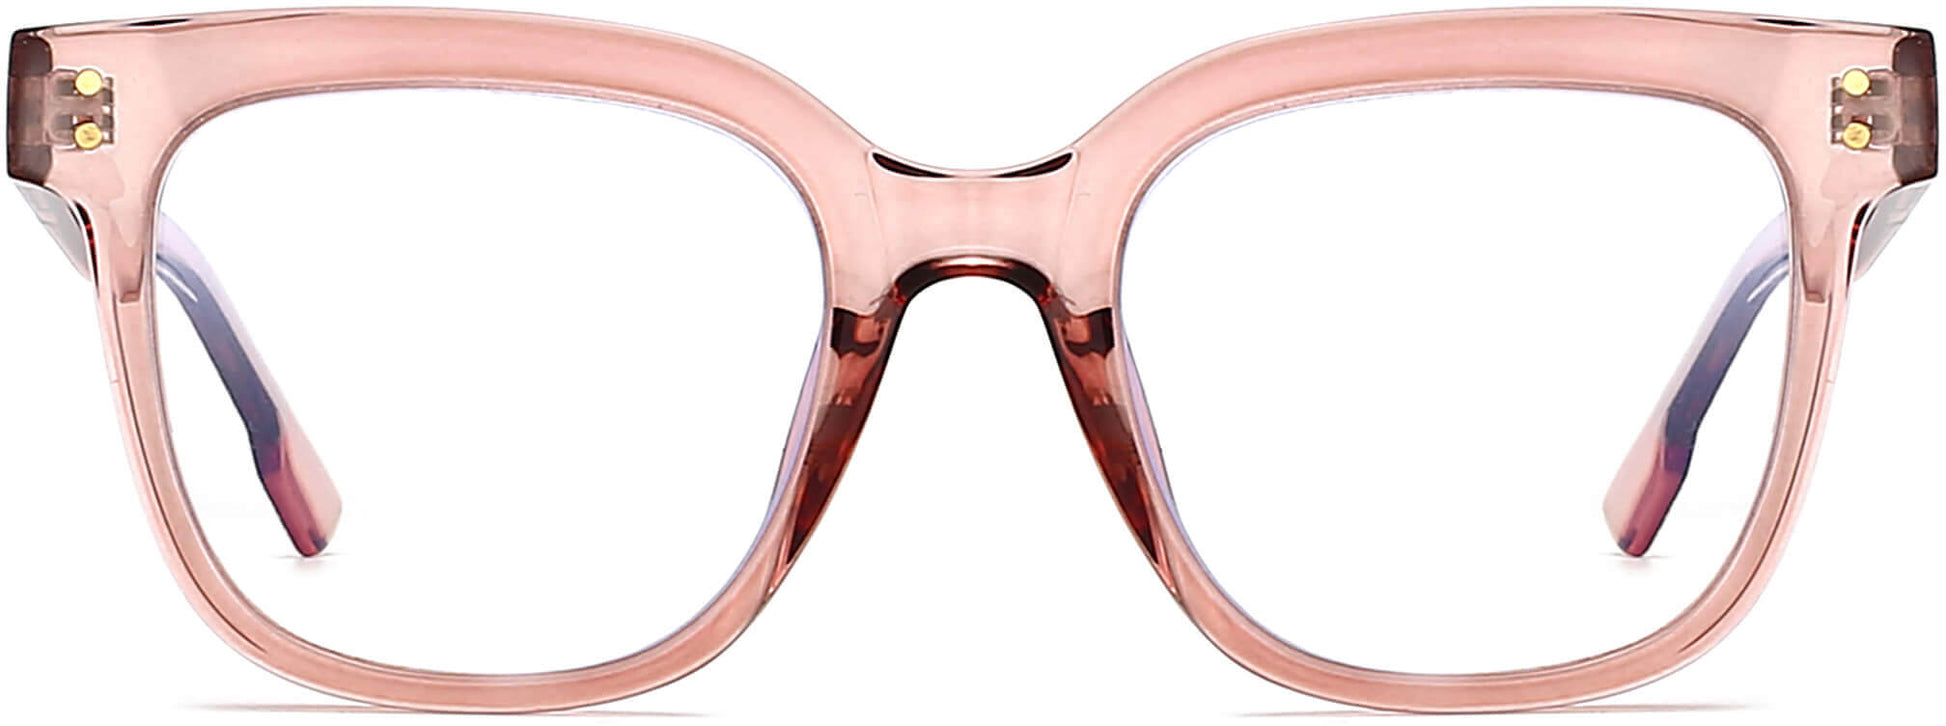 Camille Rectangle Pink Eyeglasses from ANRRI, front view